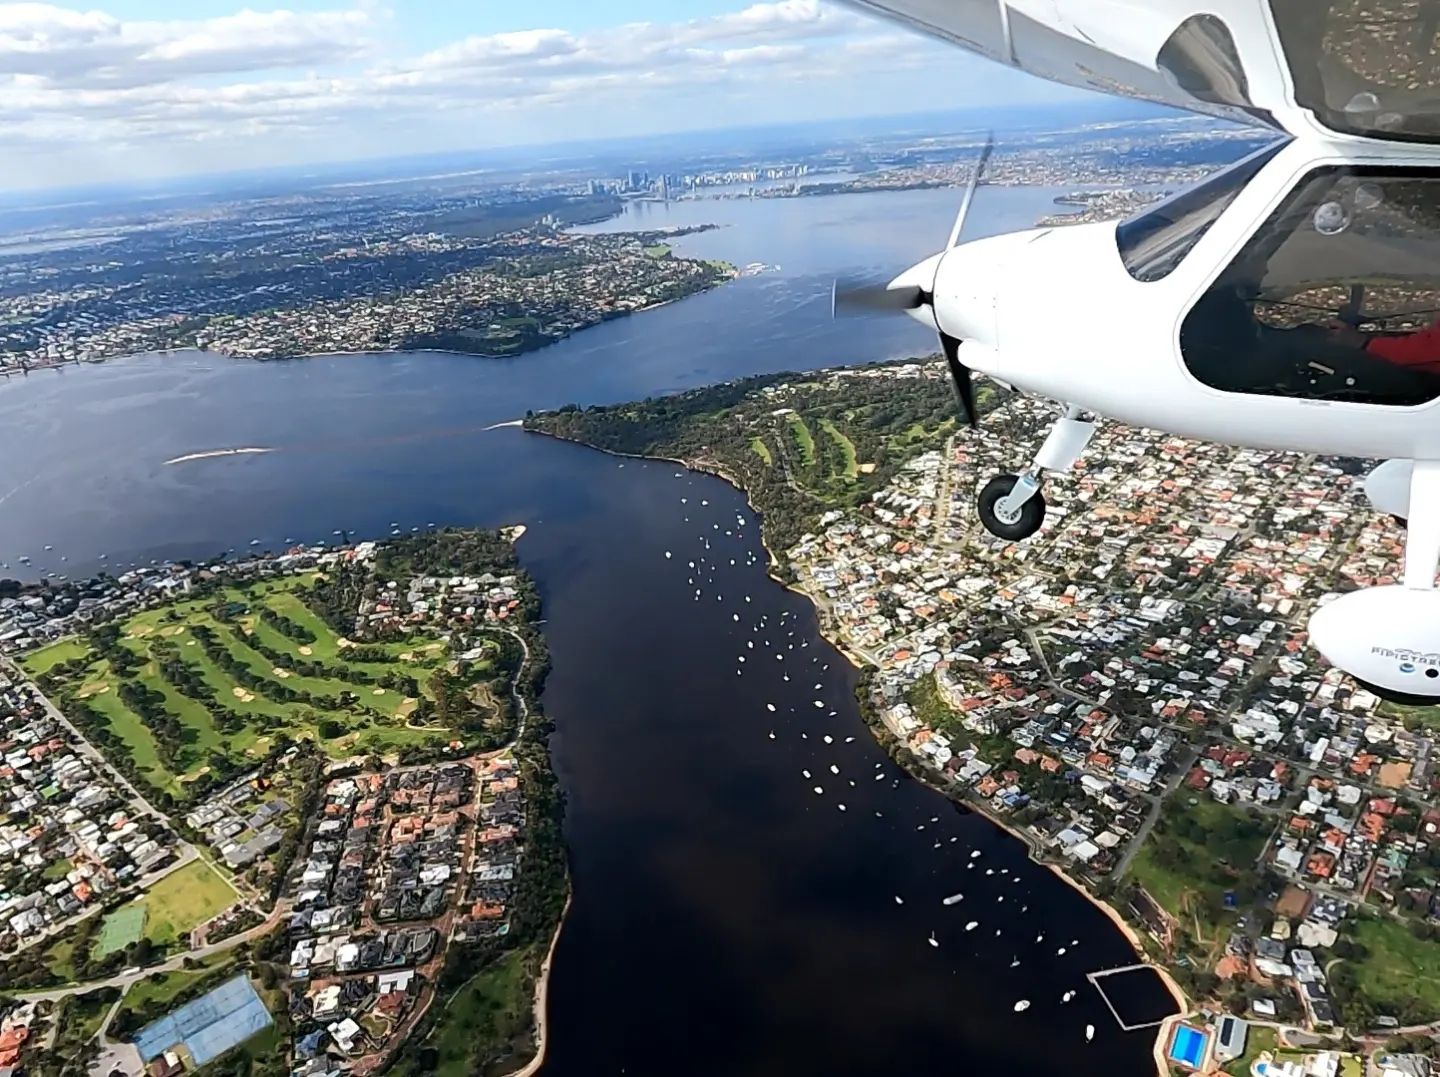 Electric Plane trial experience flight lesson over Mandurah Rivers and Beaches